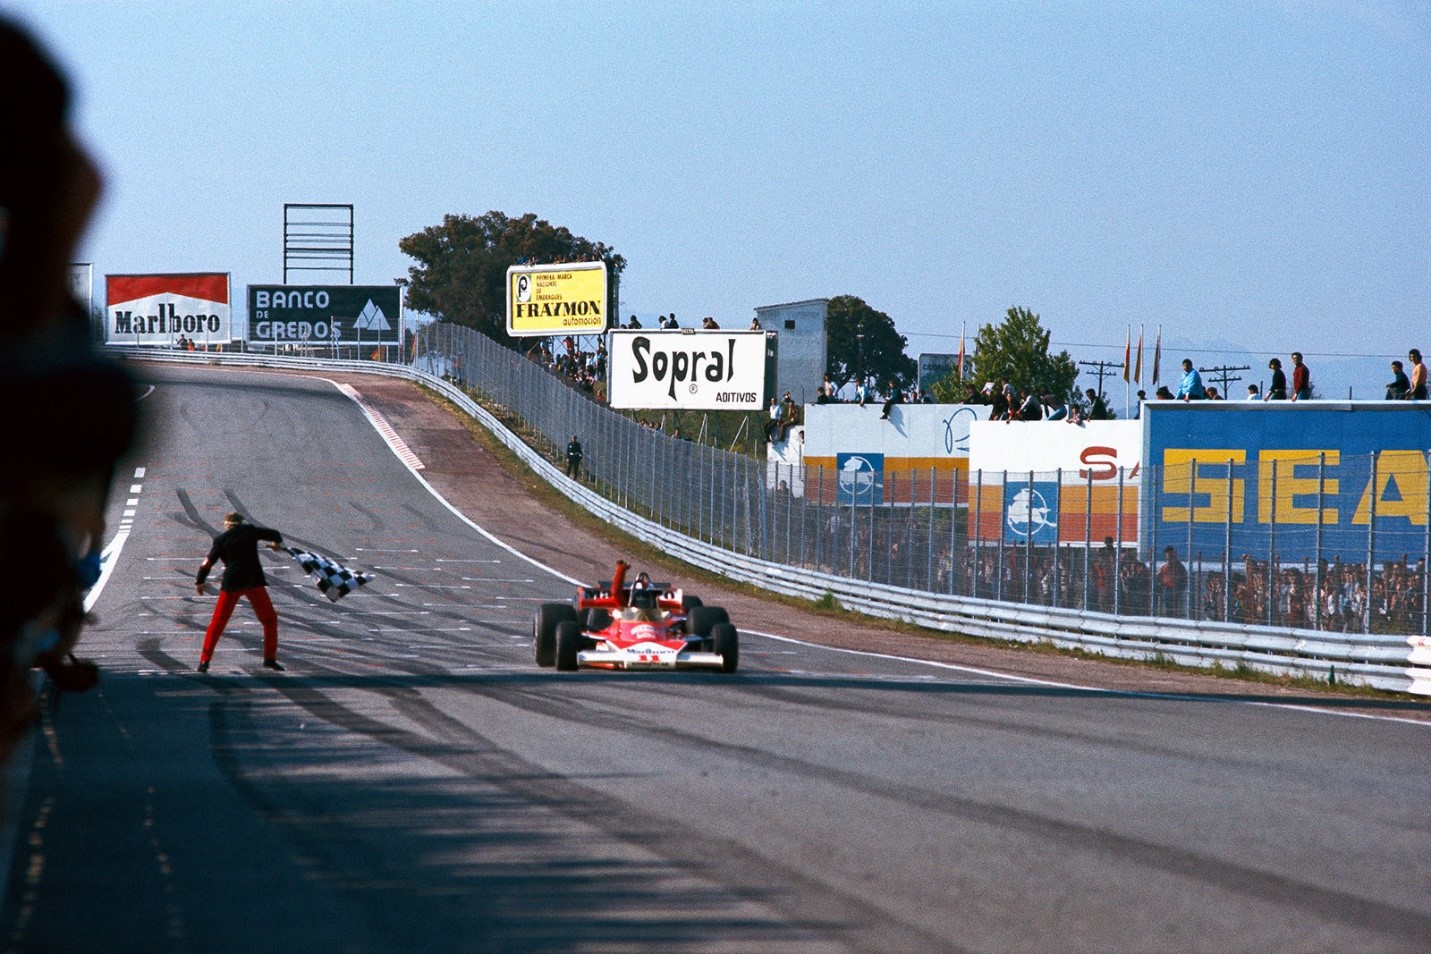 McLaren driver James Hunt, closely followed by the overlapped Ferrari of Regazzoni, crosses the line and takes the chequered flag to win the Jarama Grand Prix near Madrid, Spain, on 02 May 1976.